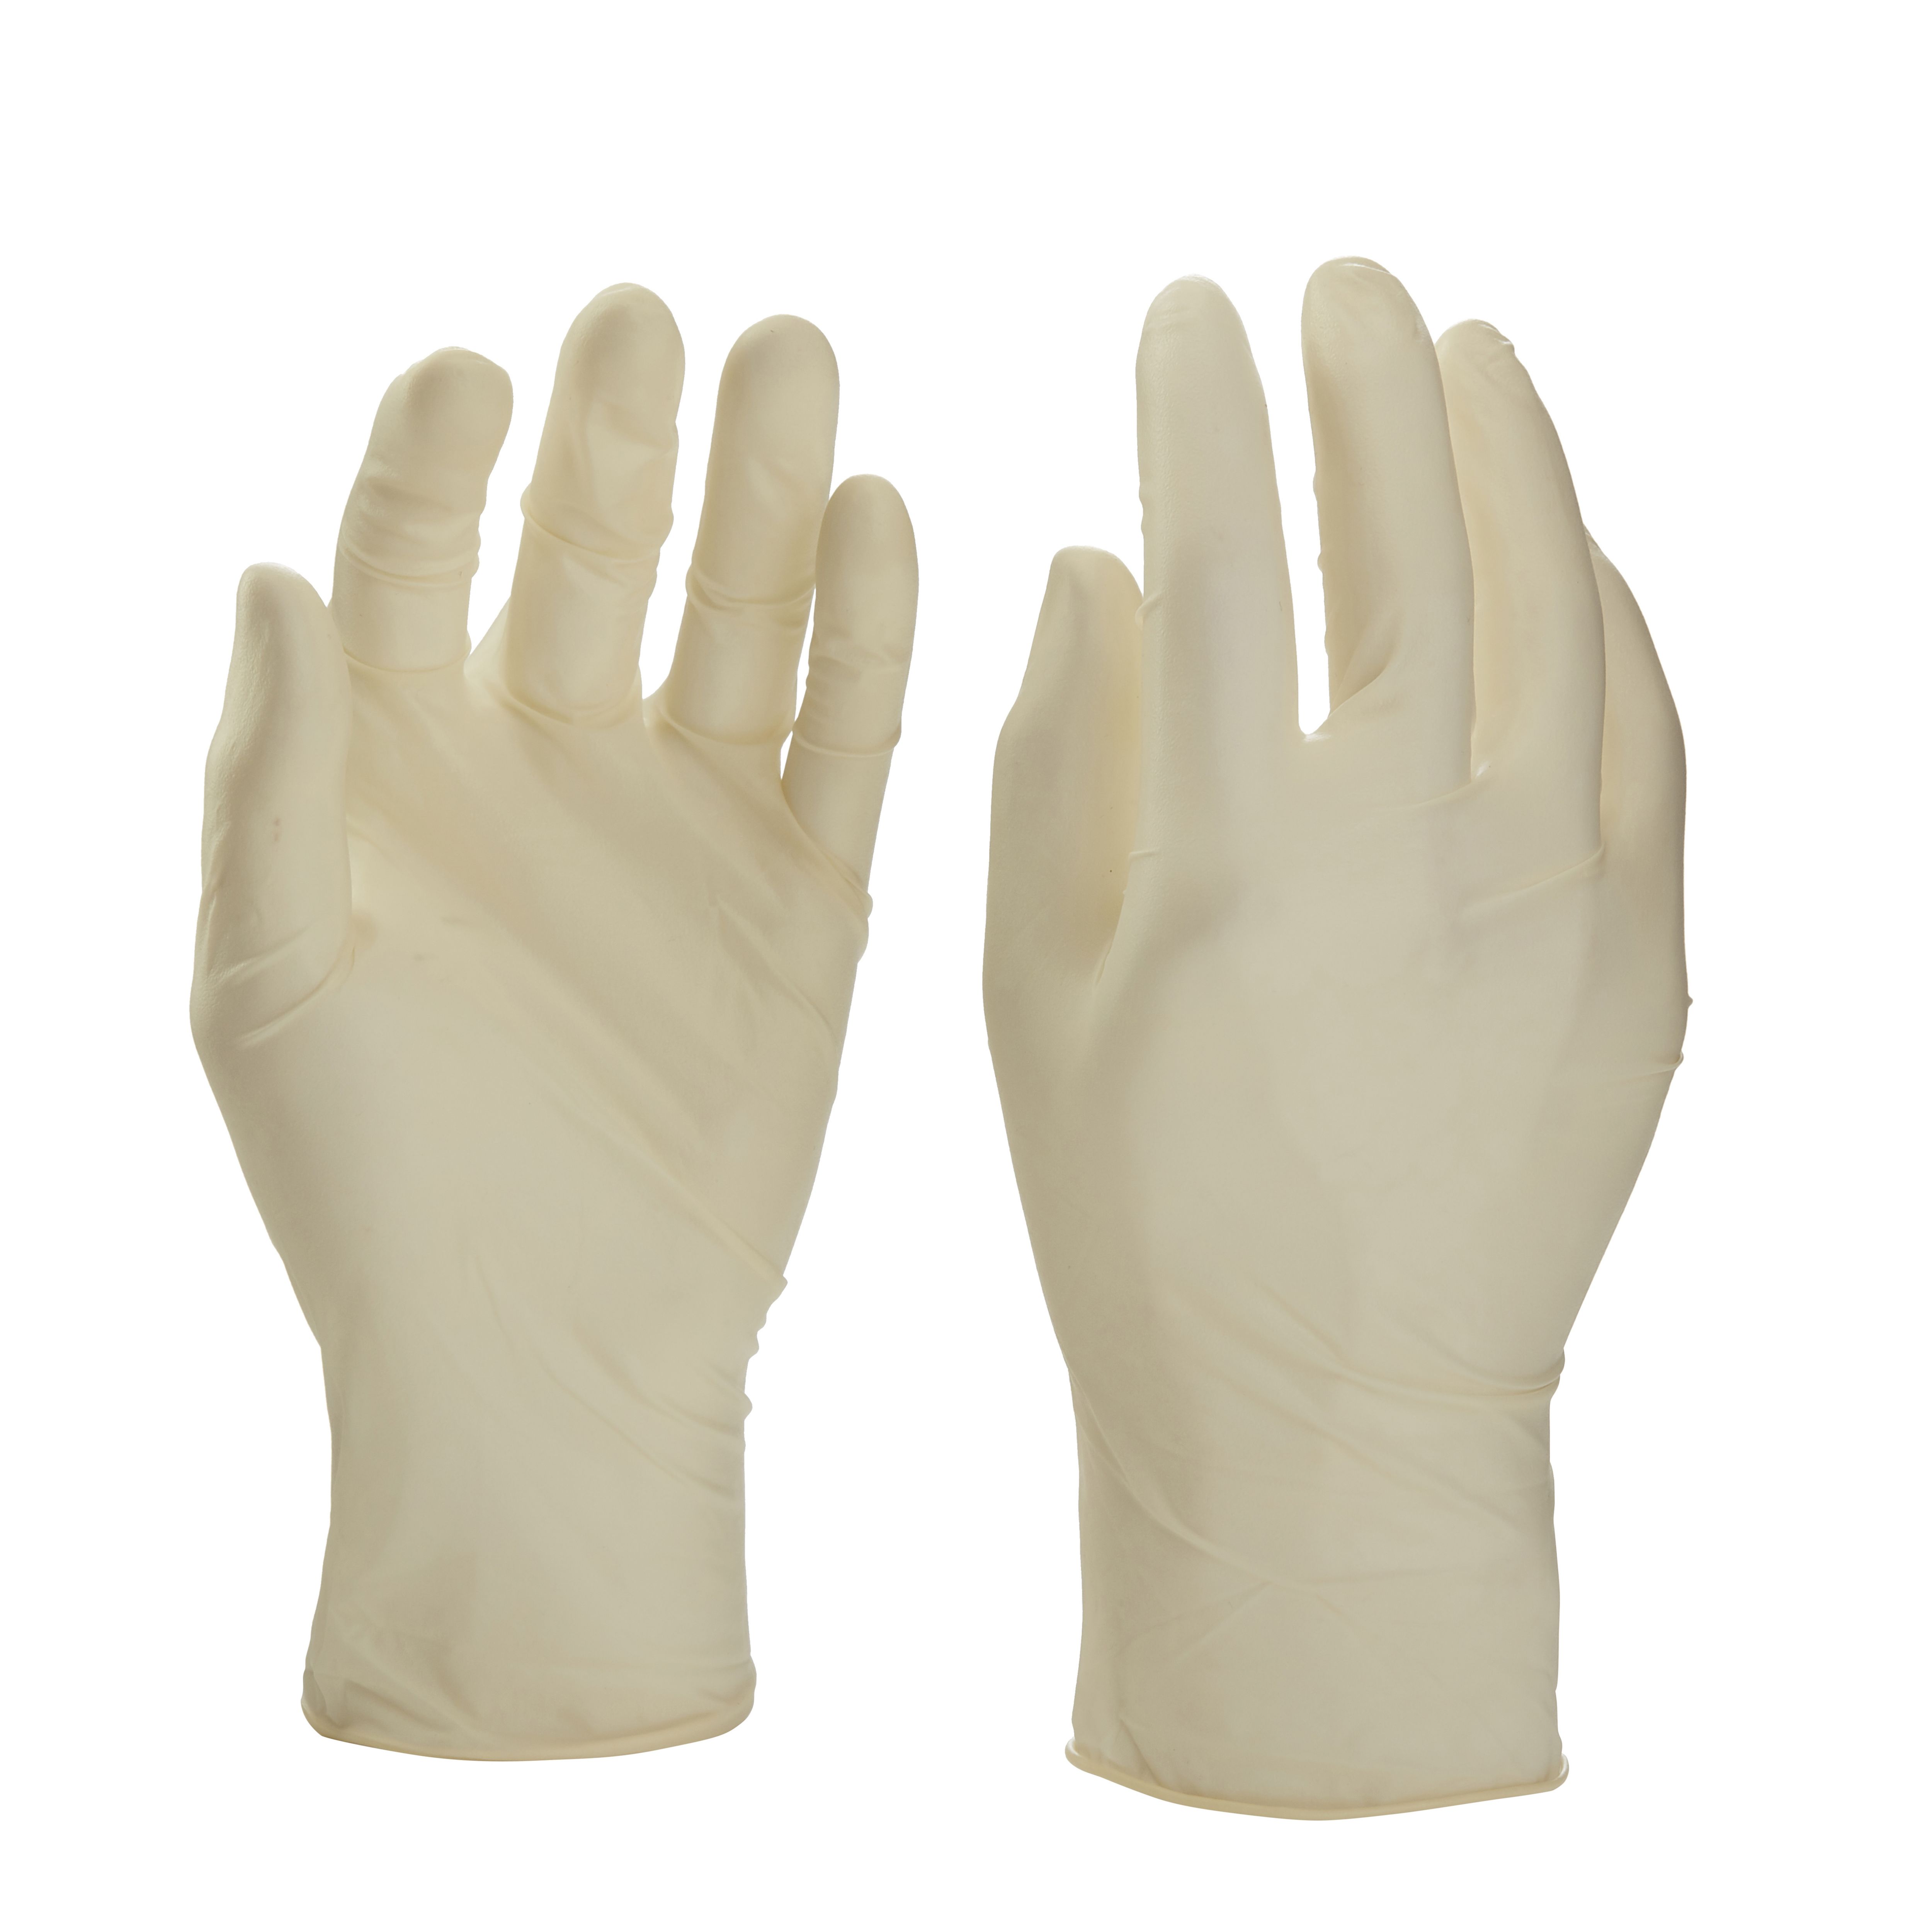 Latex Disposable gloves Small, Pack of 10